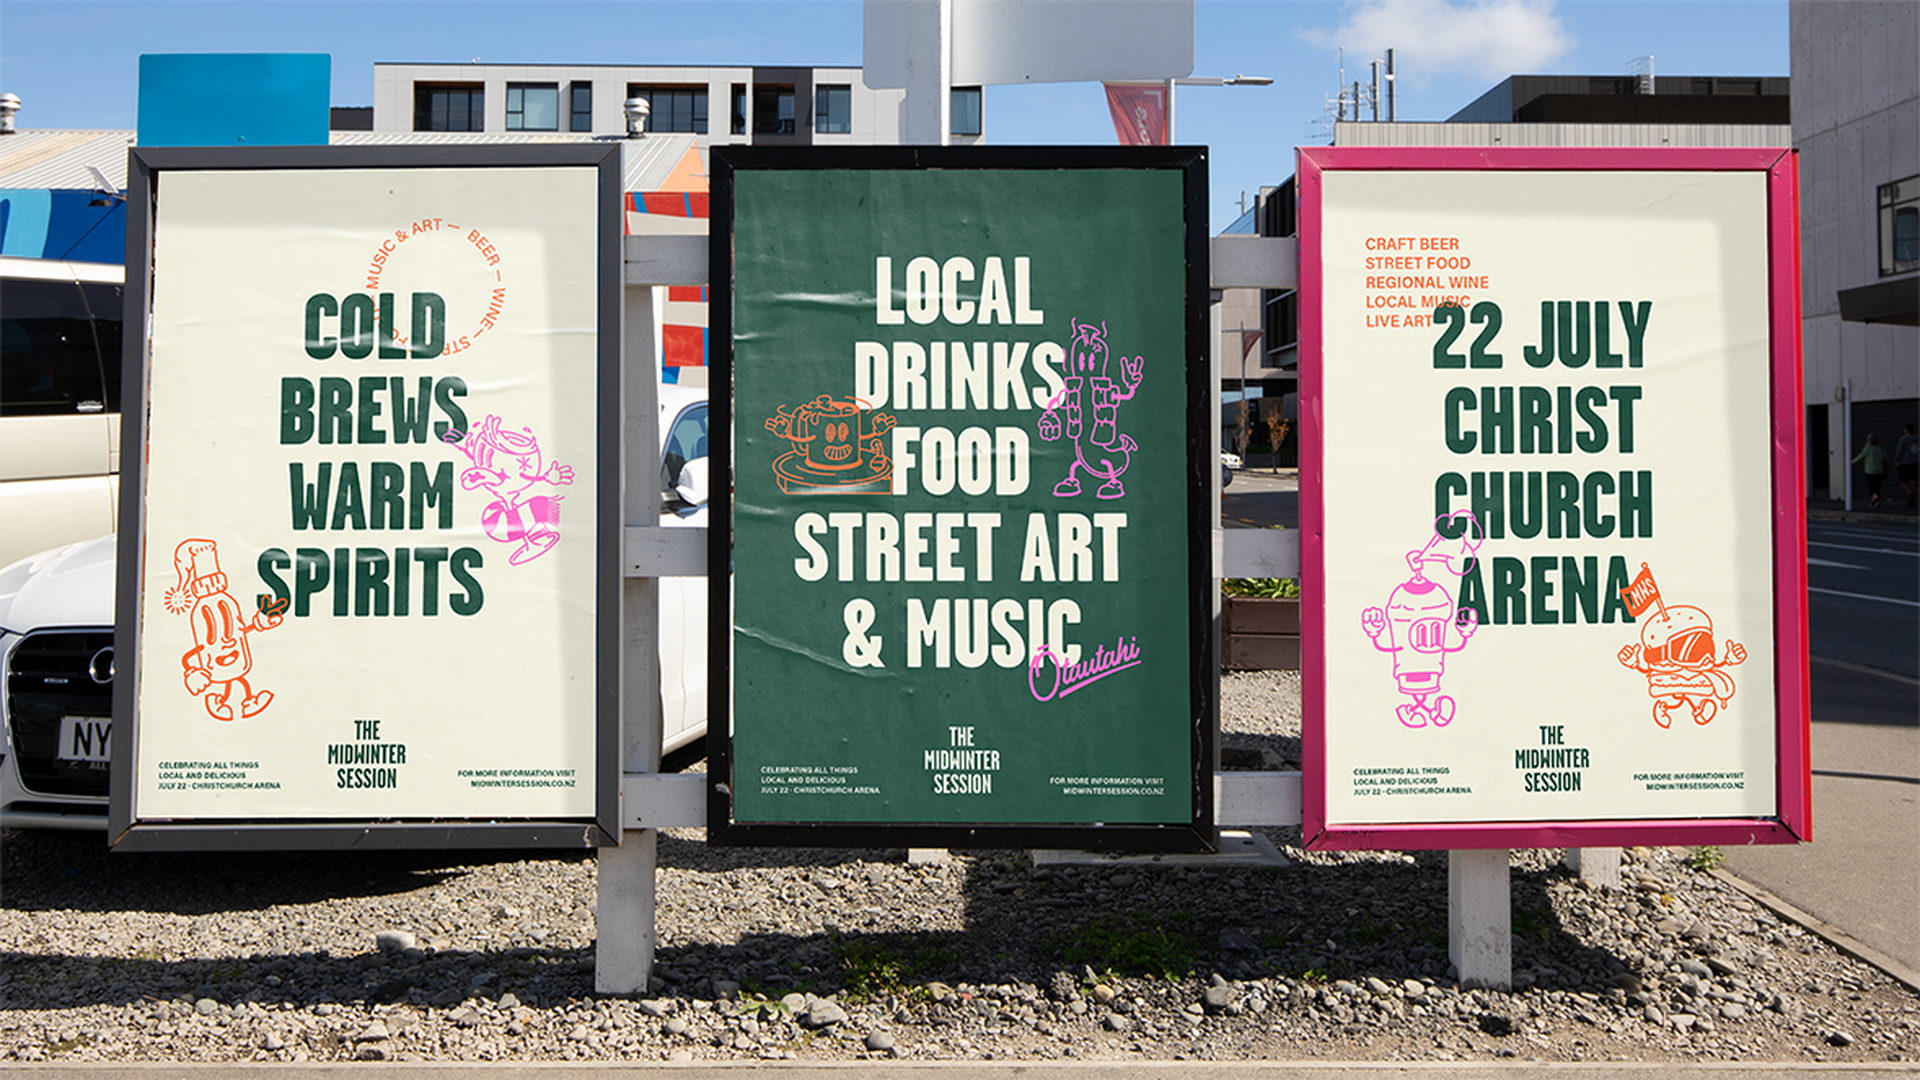 Posters on the street of The Midwinter Session brand